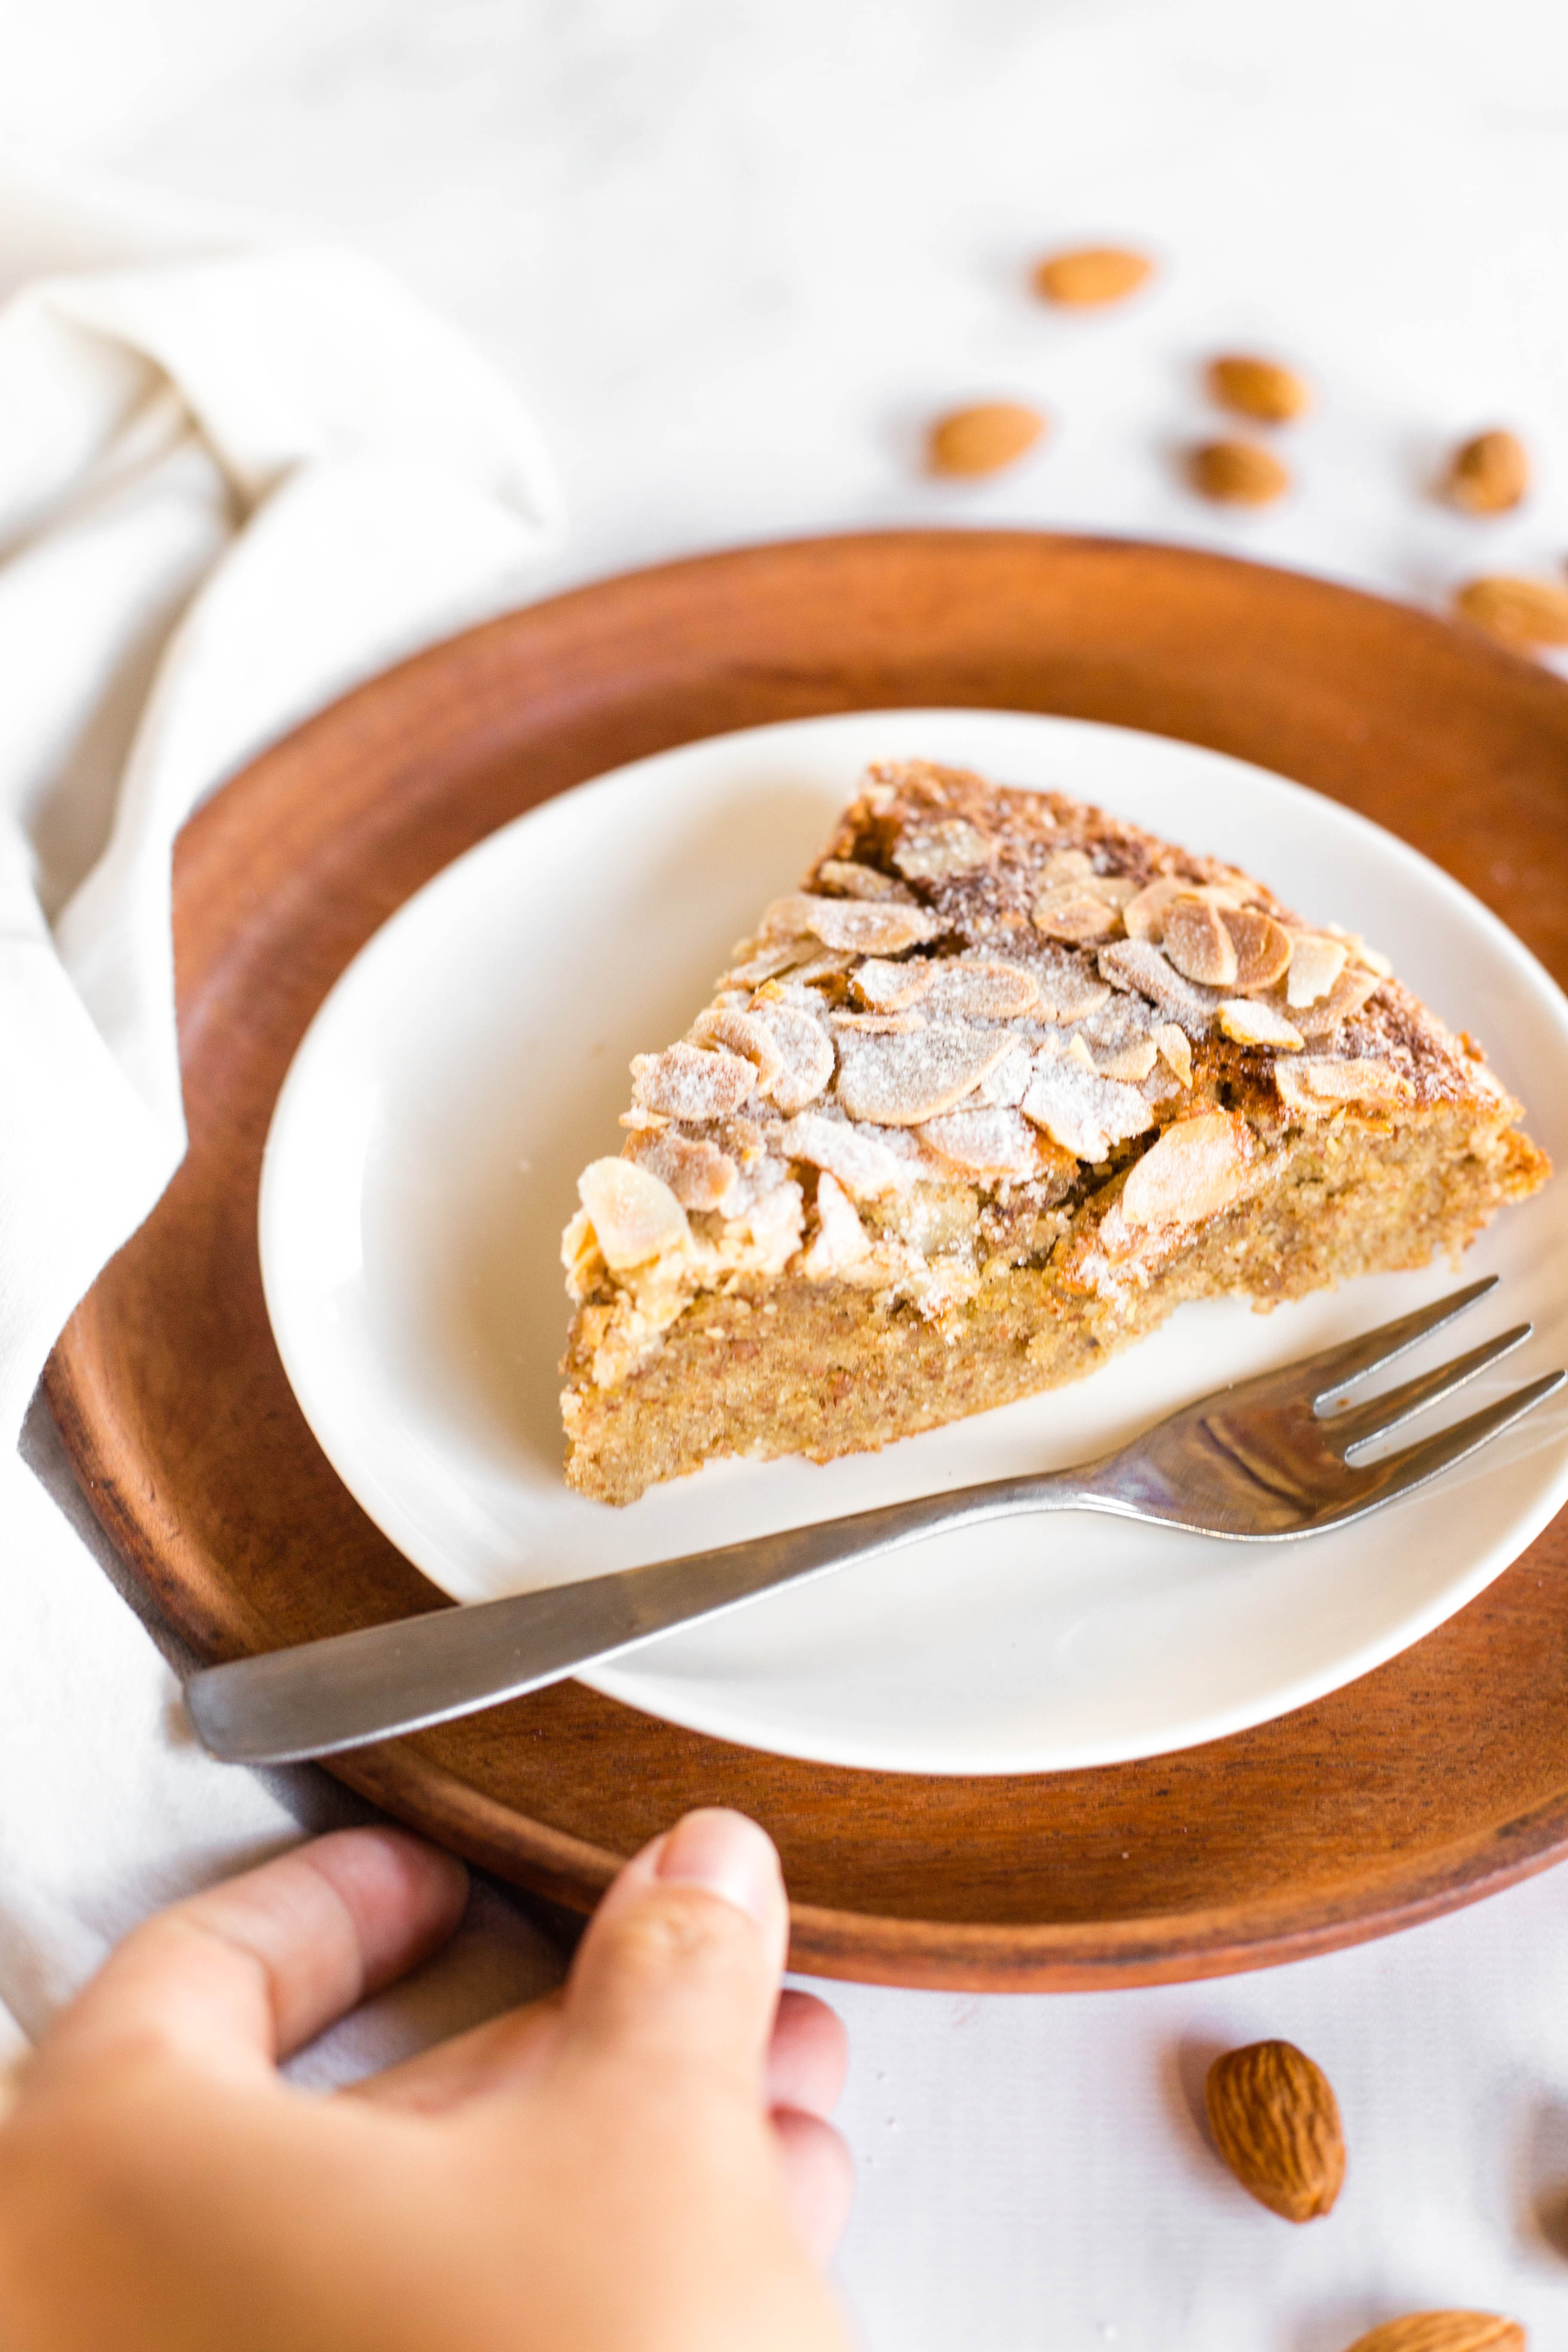 Reaching for a slice of gluten-free flourless almond cake on a white plate.